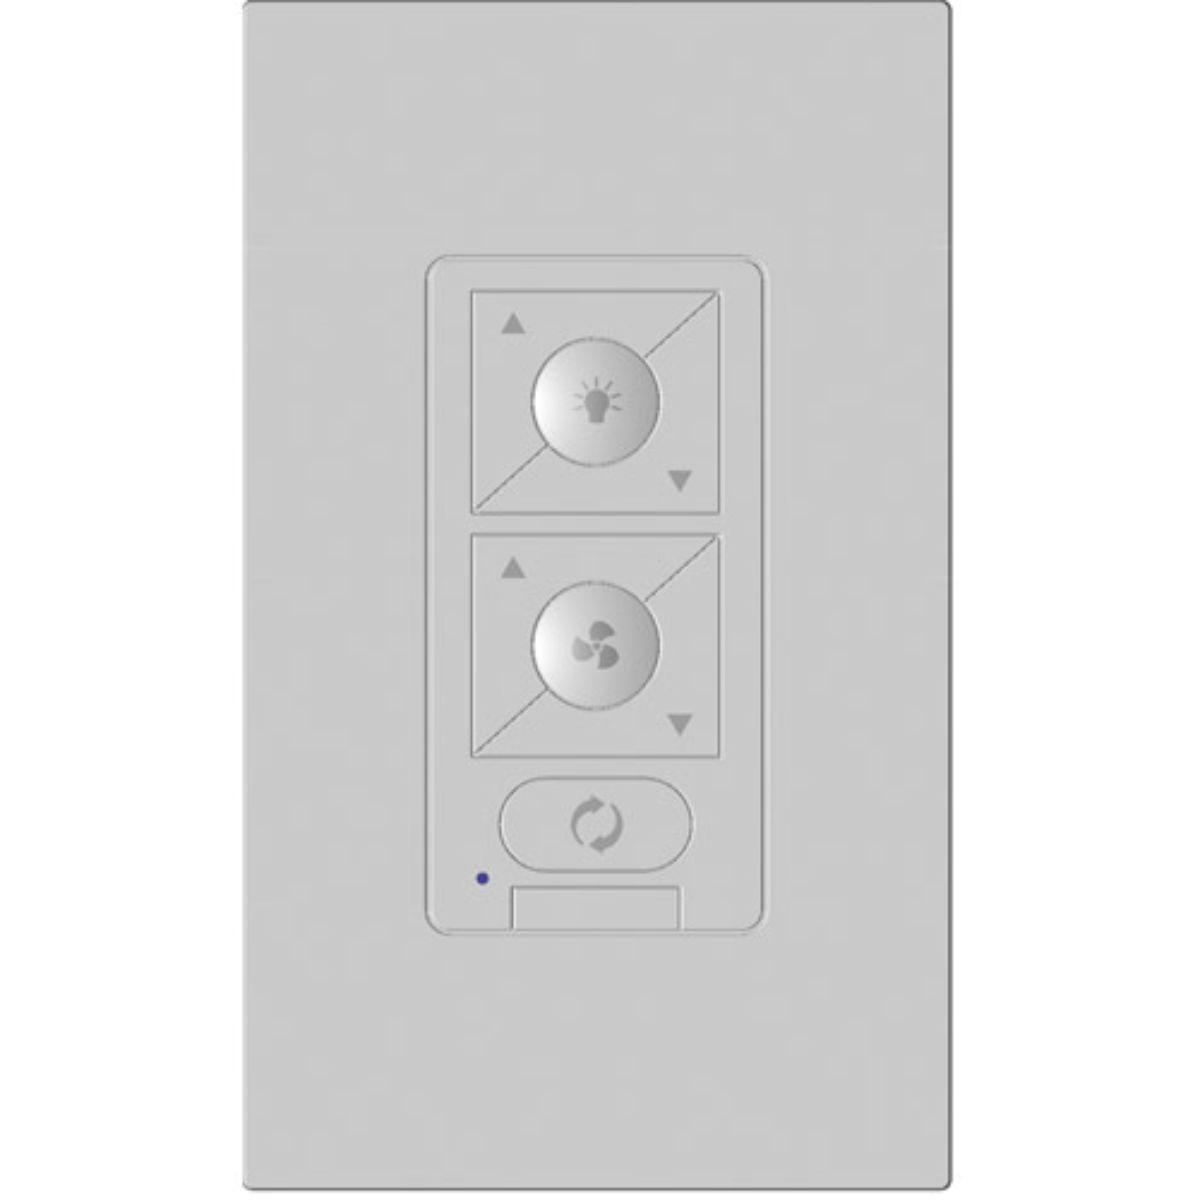 6 speed Ceiling Fan and Light Bluetooth Wall Control, White Finish - Bees Lighting